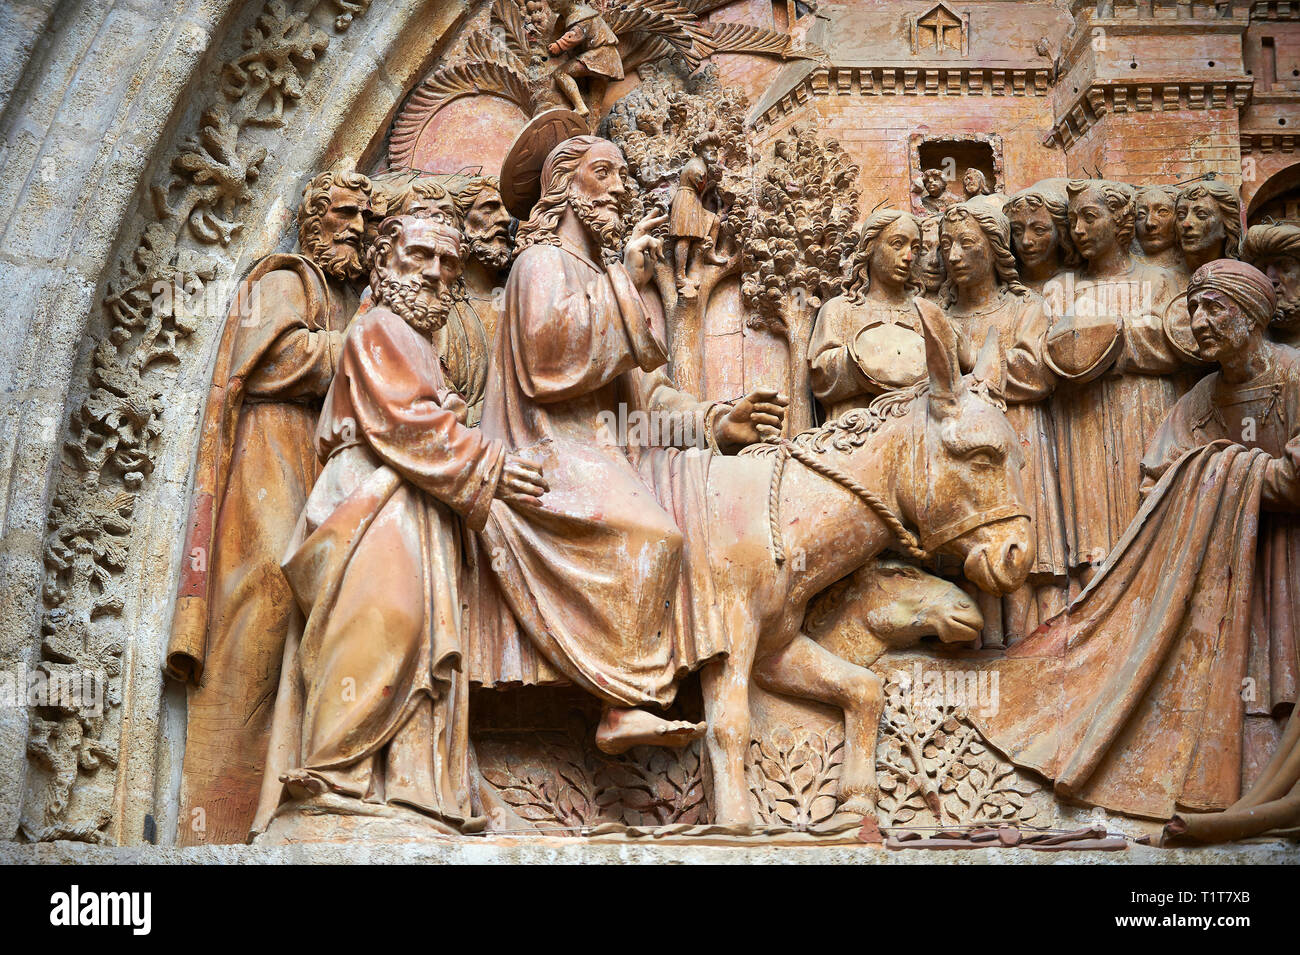 Christ S Entry Into Jerusalem By Lope Marin In 1548 On The Gothic Puerta De Campanilla Entrance Door Of The Cathedral Of Seville Spain Stock Photo Alamy